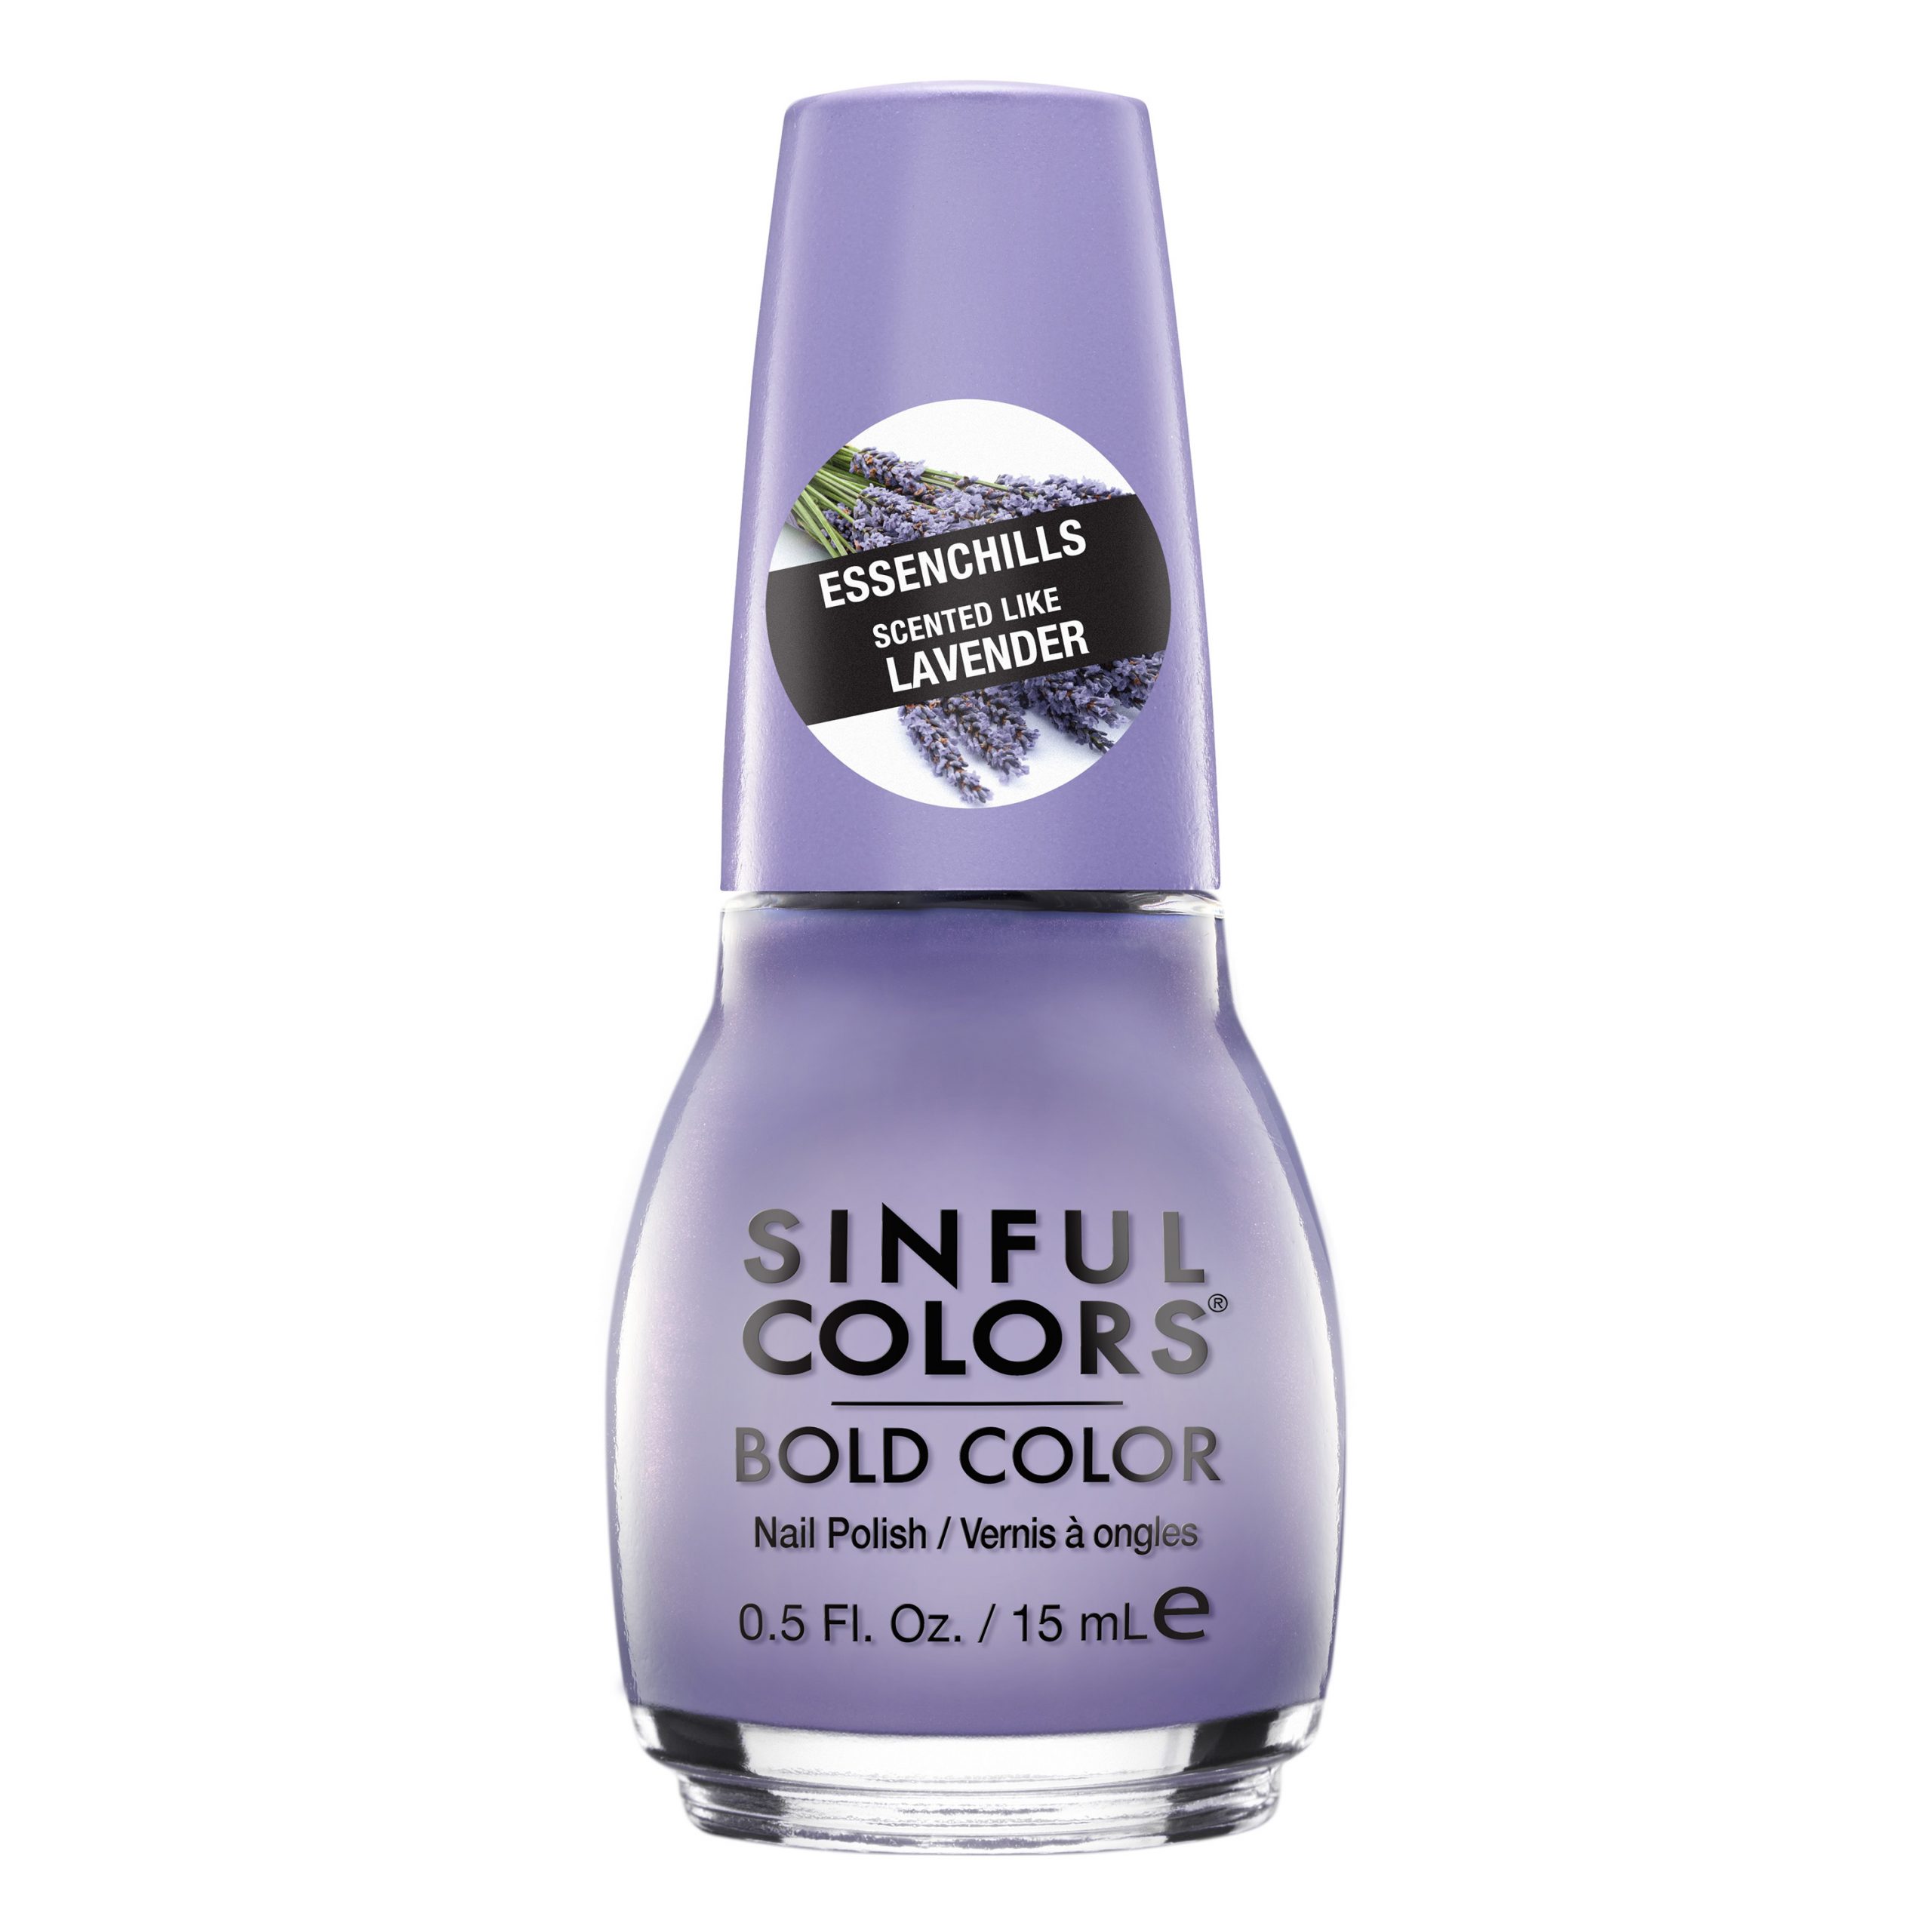 Sinful Colors | Mimsy's Blog